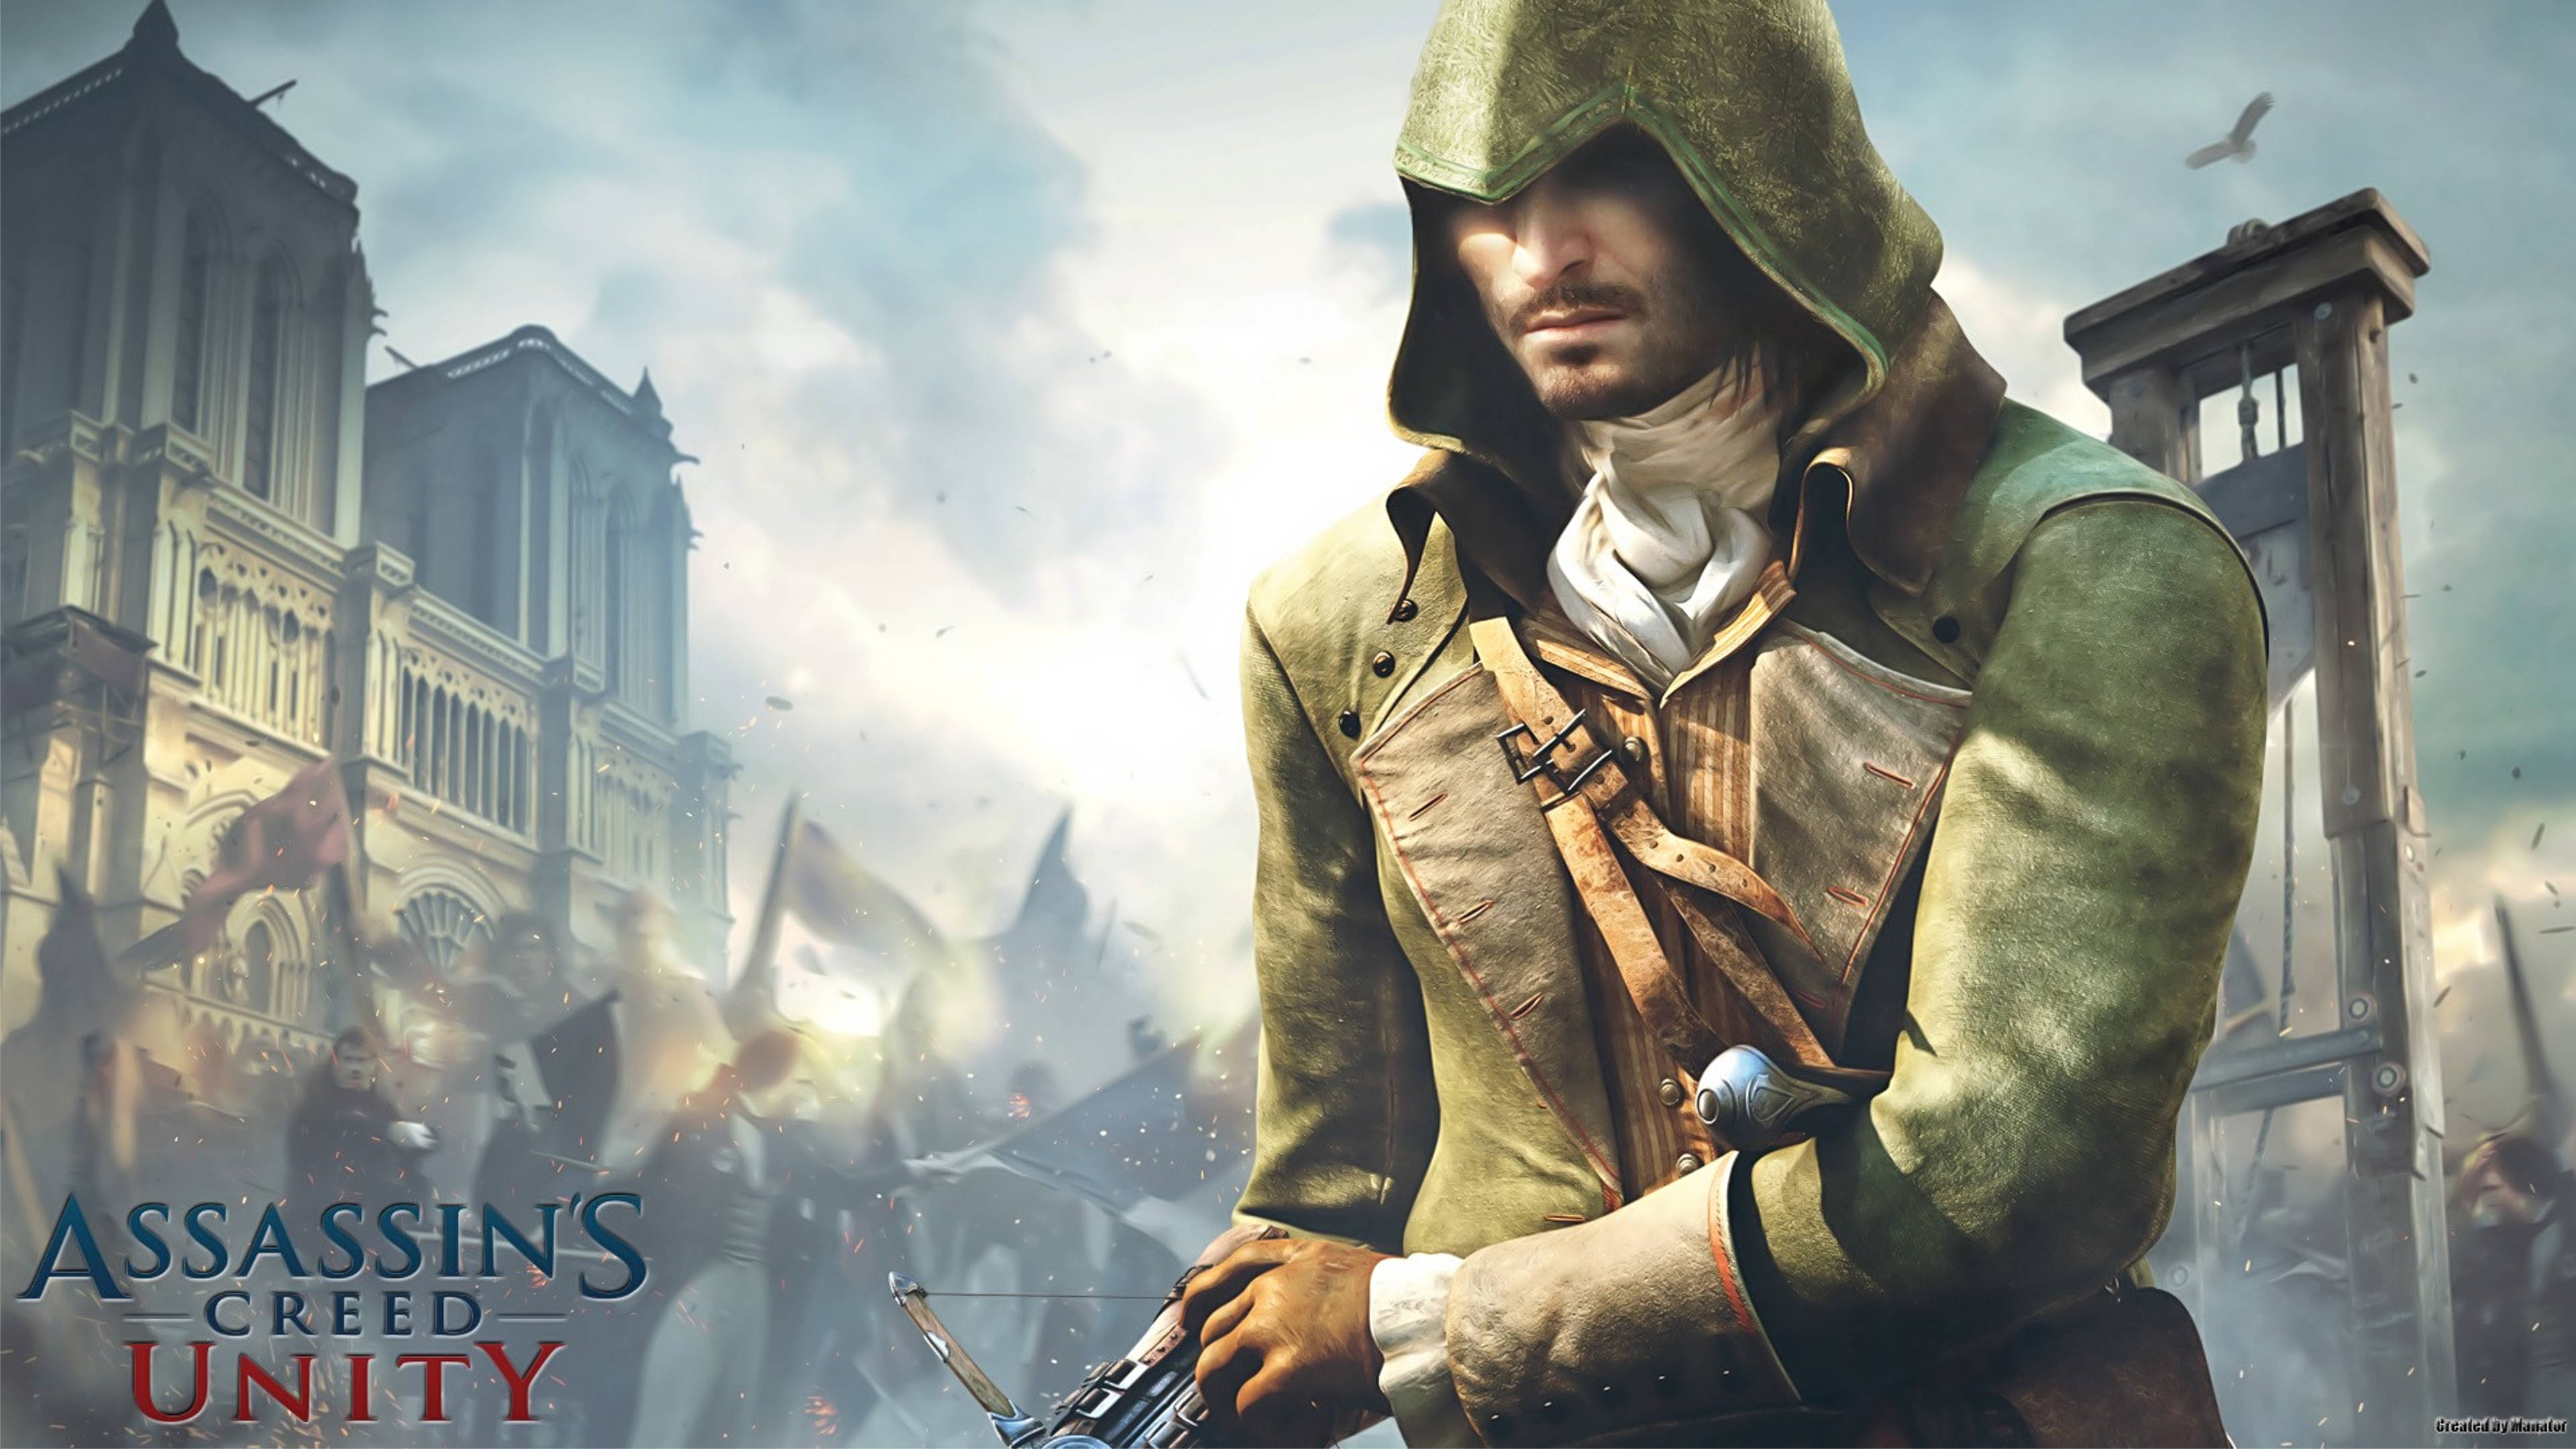 Download wallpaper 750x1334 art of assassin assassins creed unity iphone  7 iphone 8 750x1334 hd background 17712